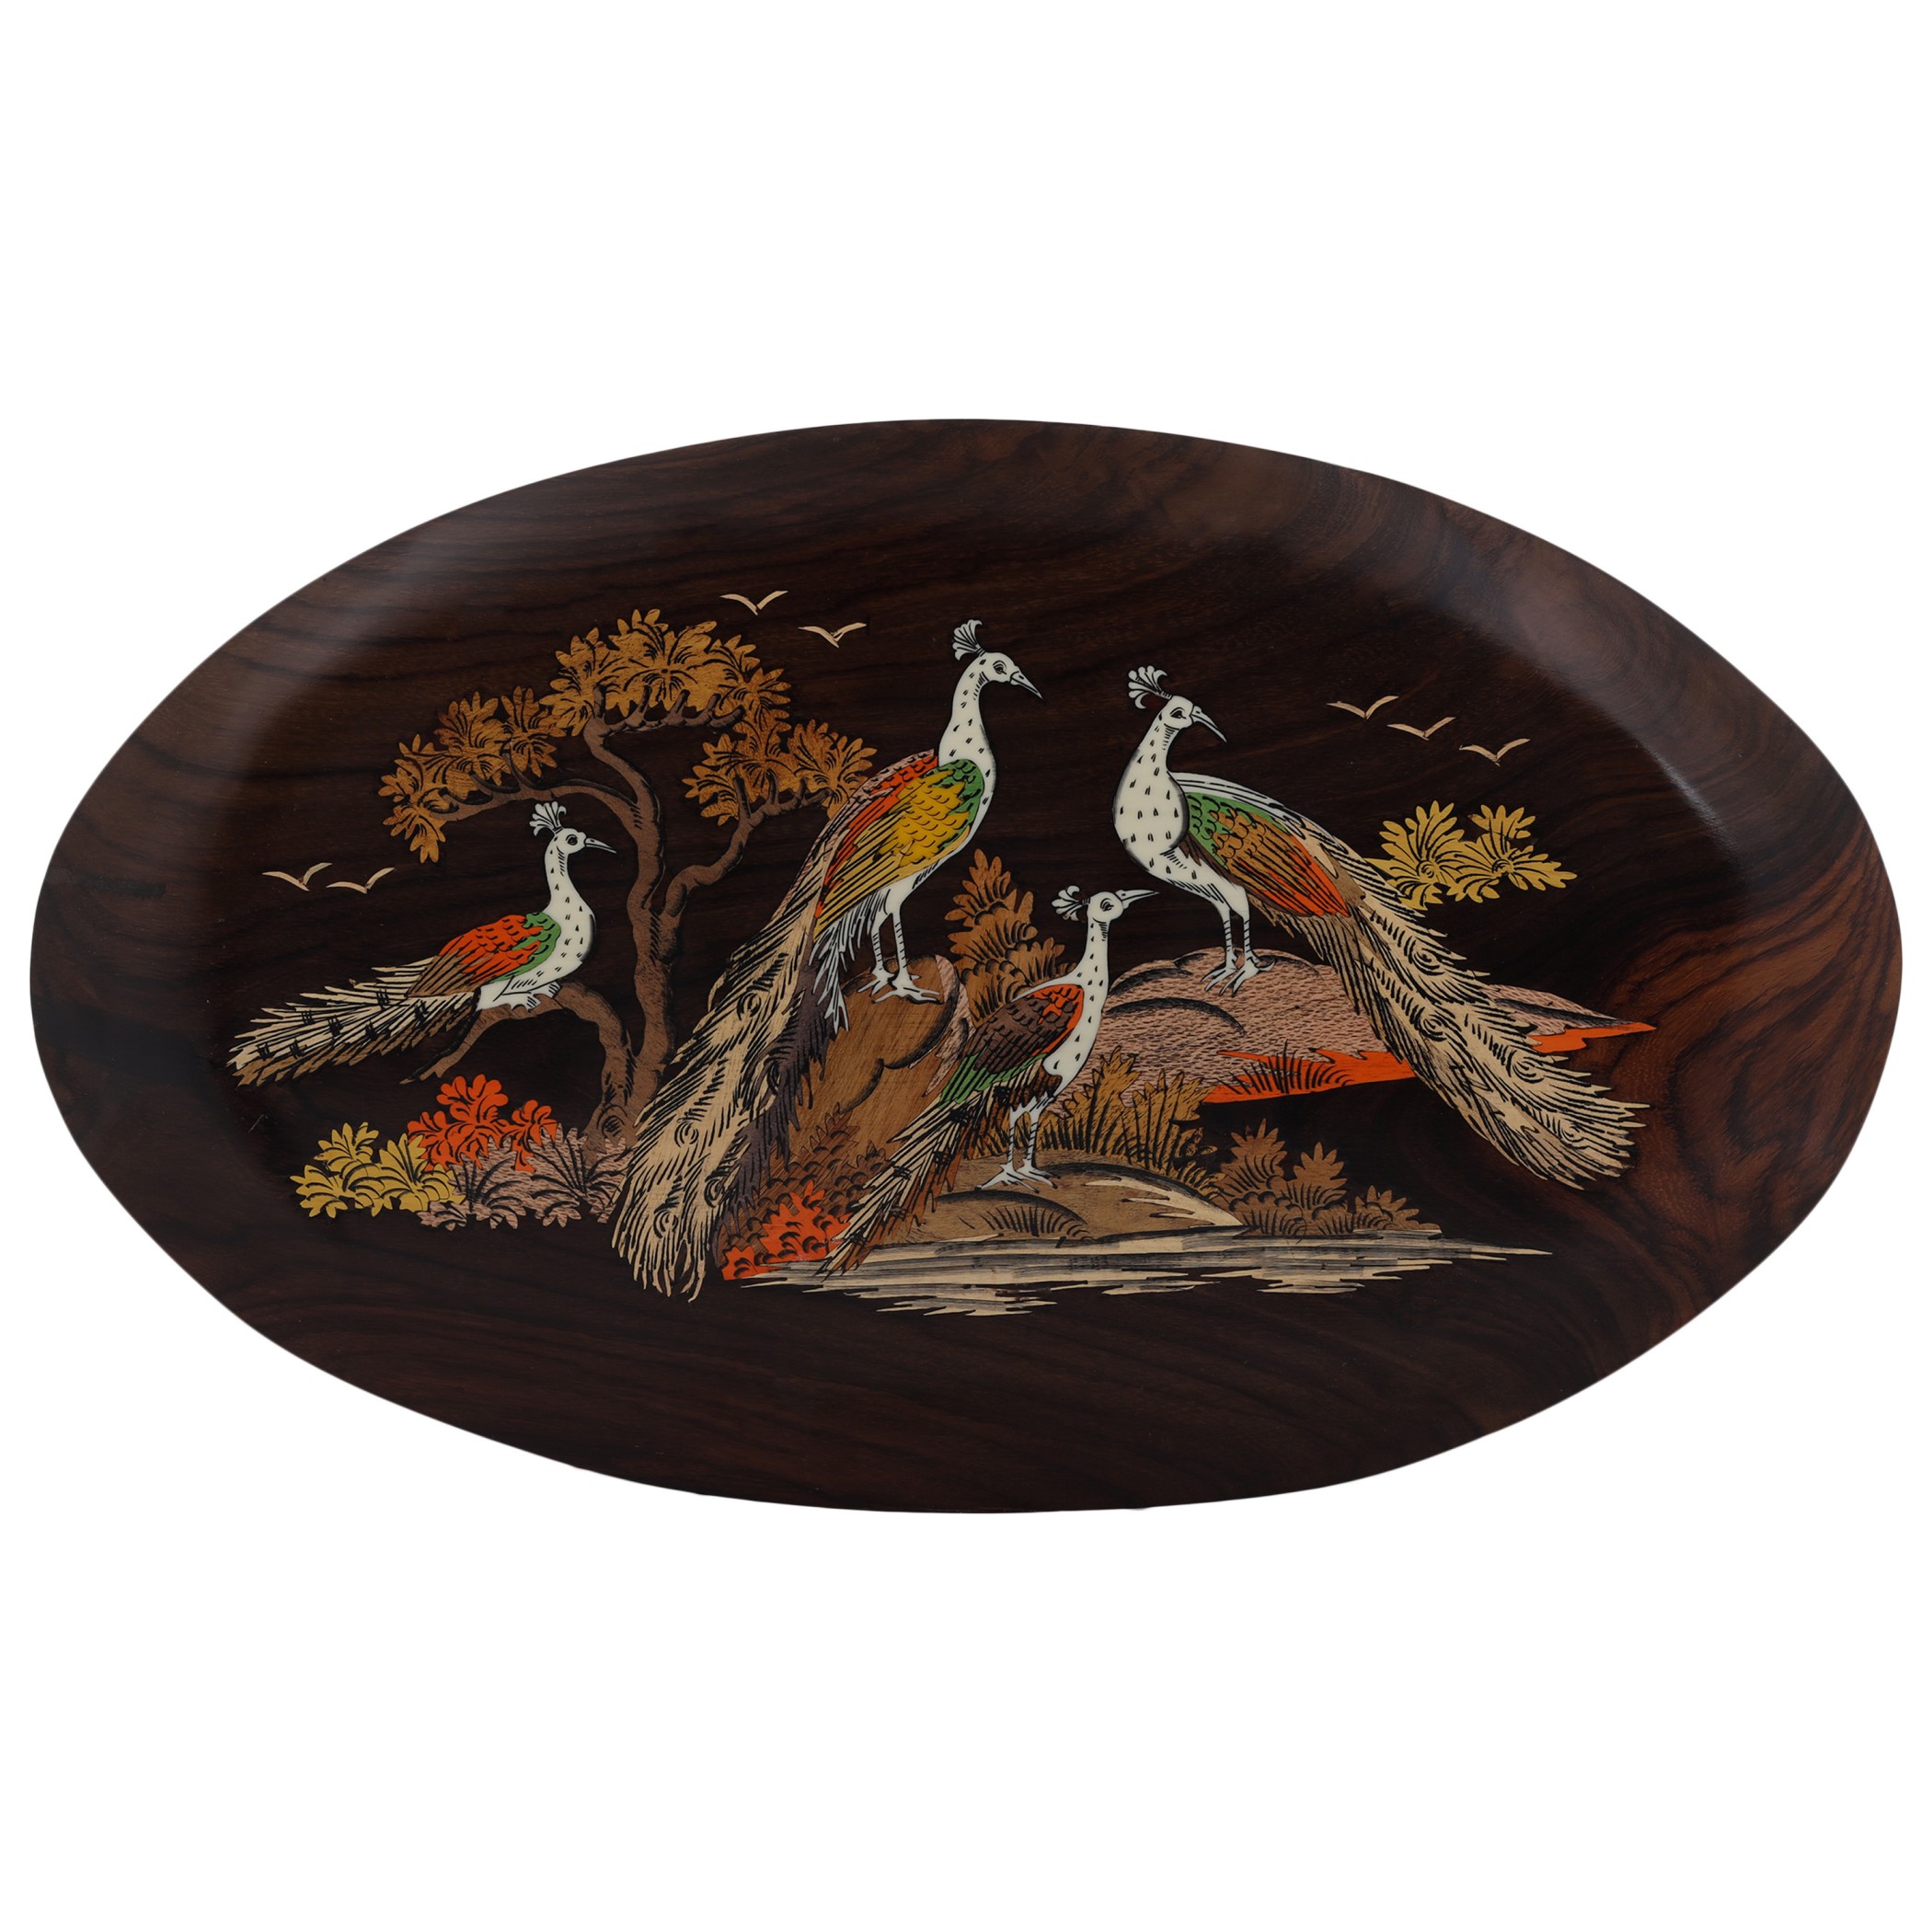 Rosed Wood Inly Oval  Peacock Wall Penal